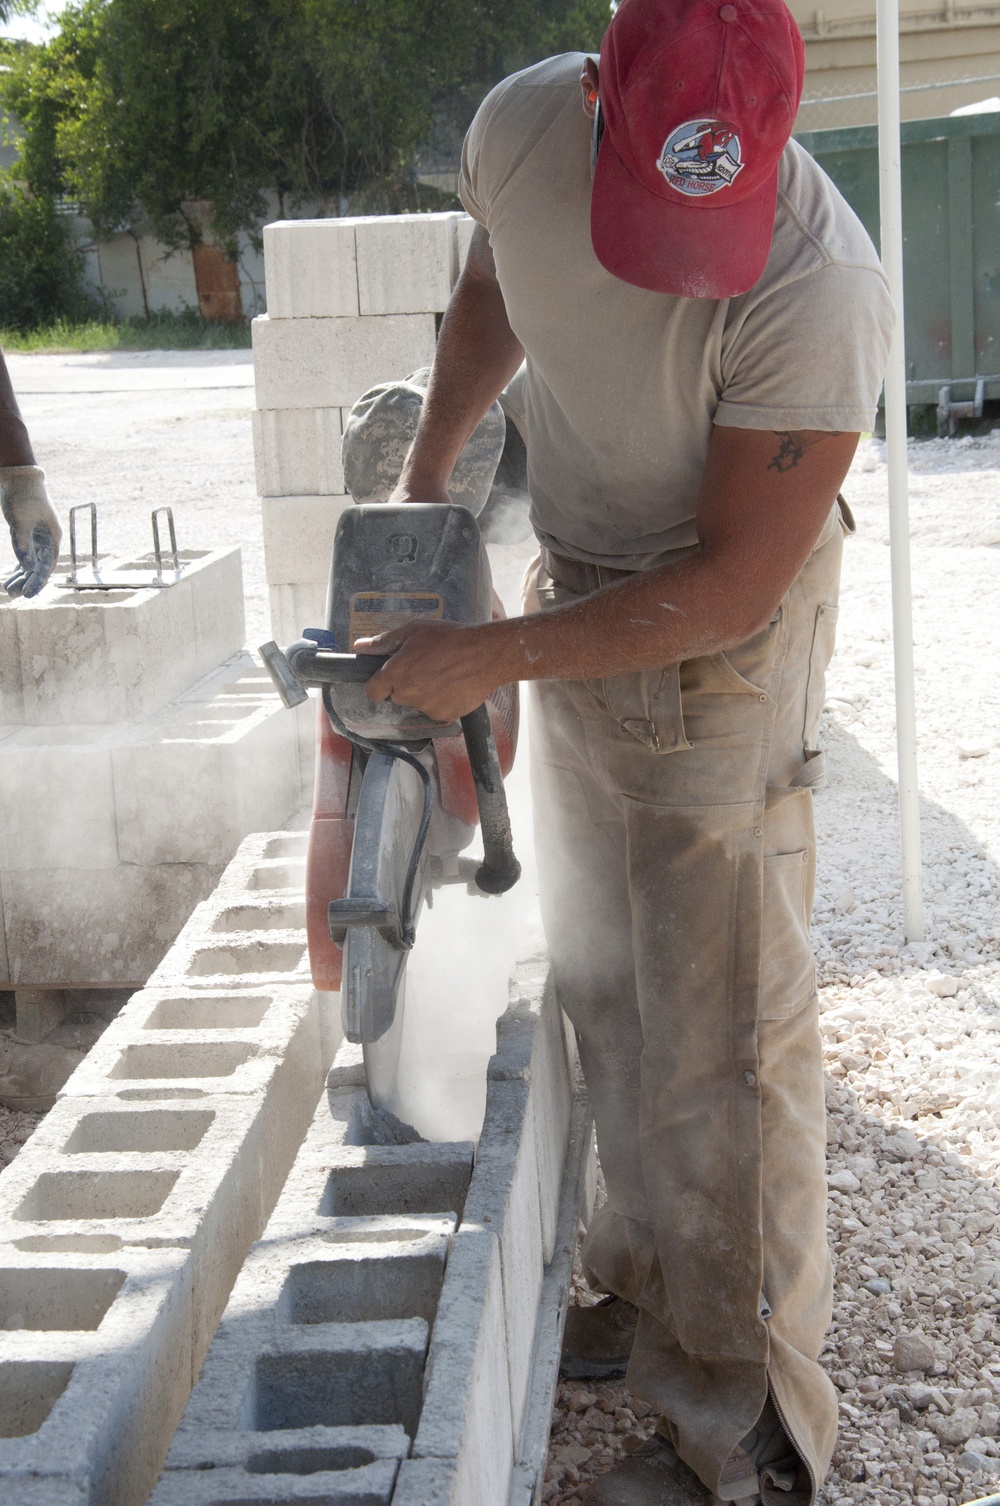 Rhode Island native learns new trades in Belize